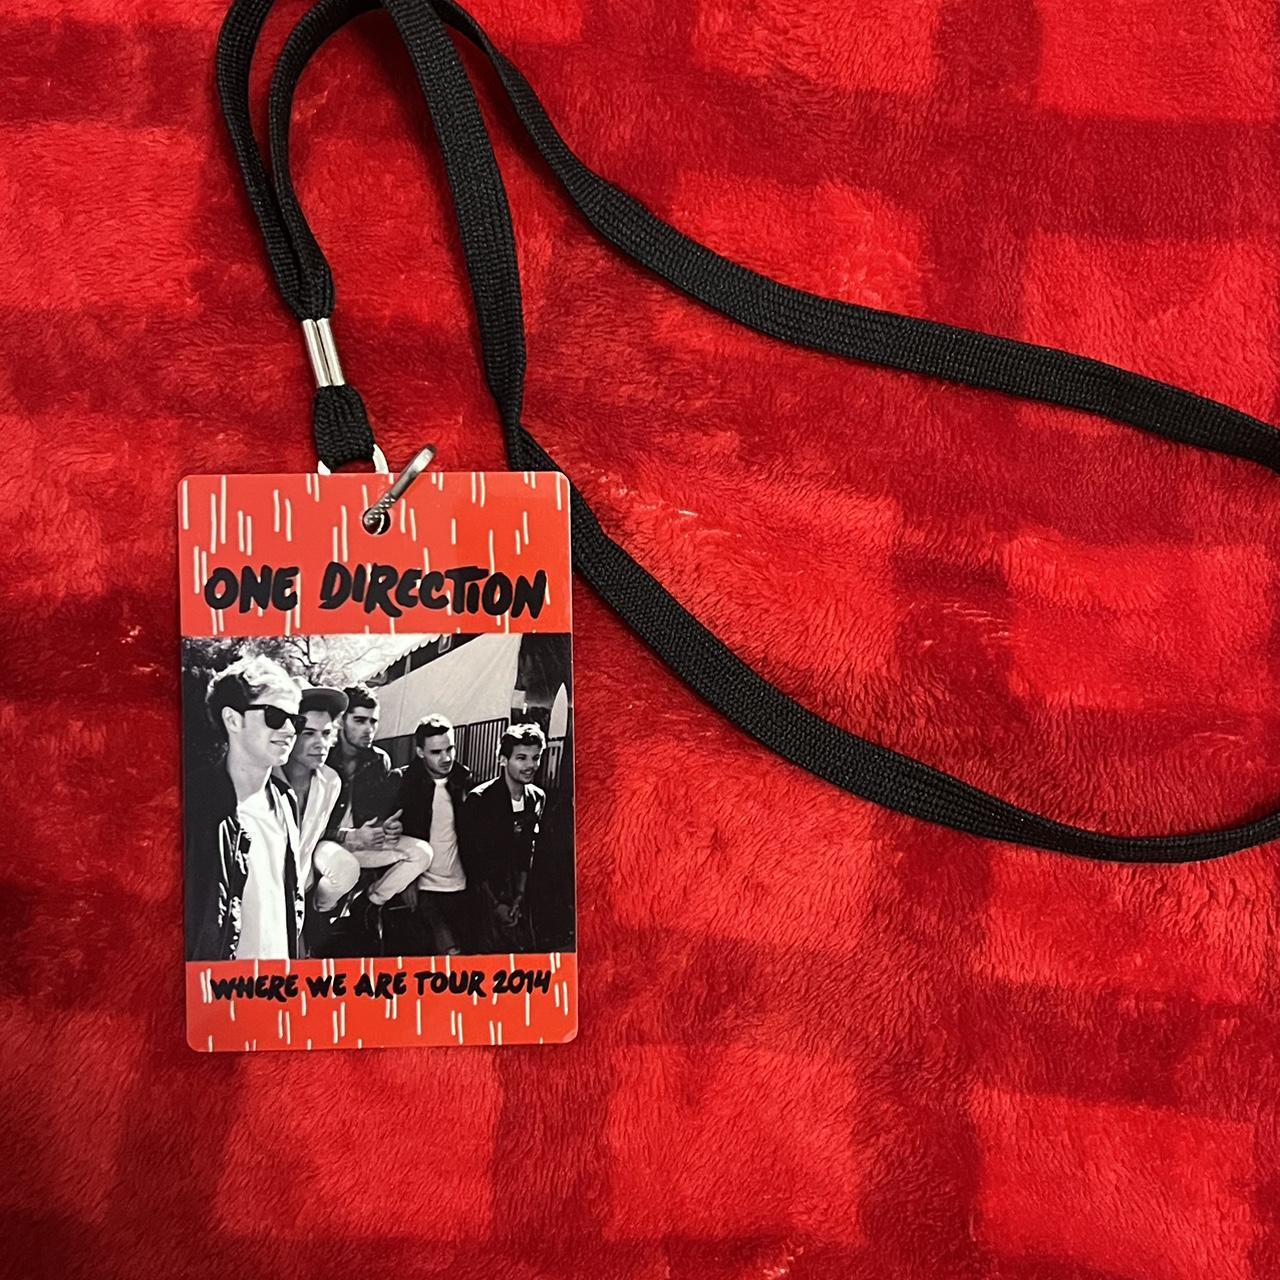 One Direction ring/charm!! 💜💜 tags: #OneDirection - Depop